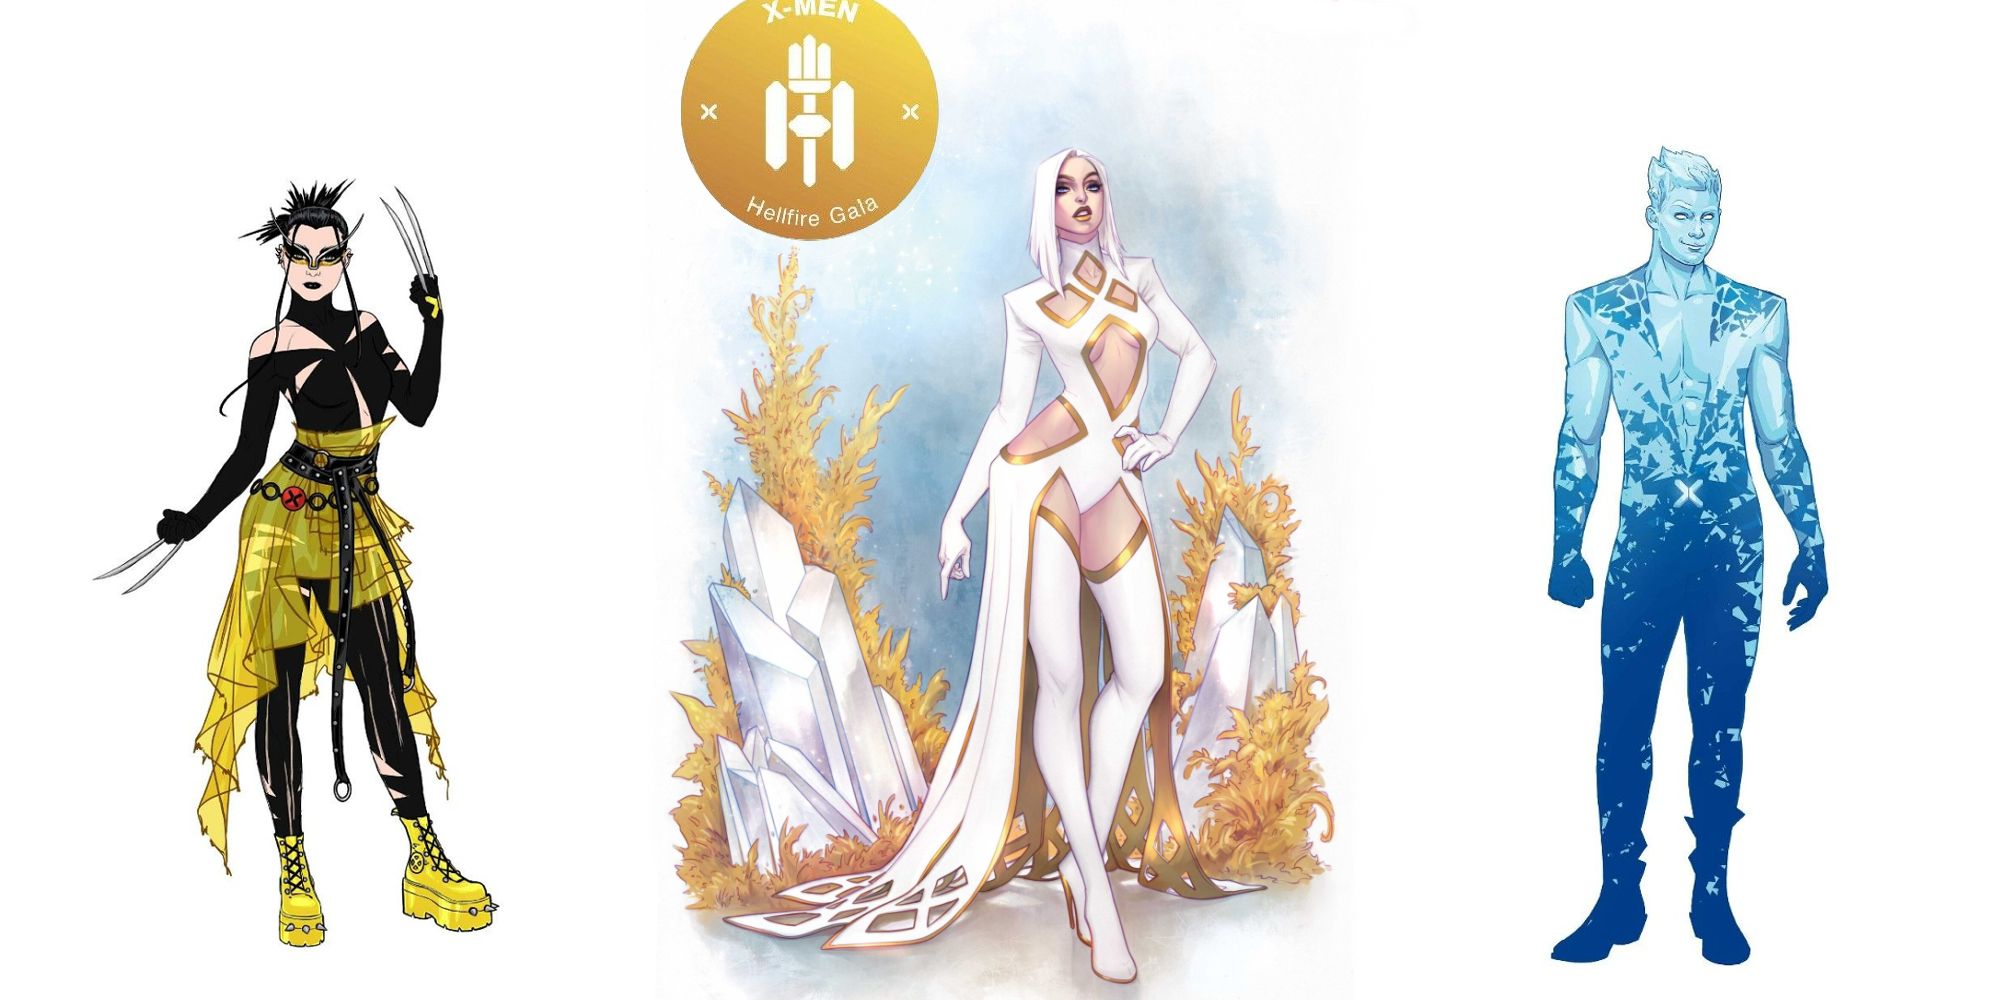 X-Men Hellfire gala designs for Laura Kinney Wolverine, Emma Frost, and Iceman